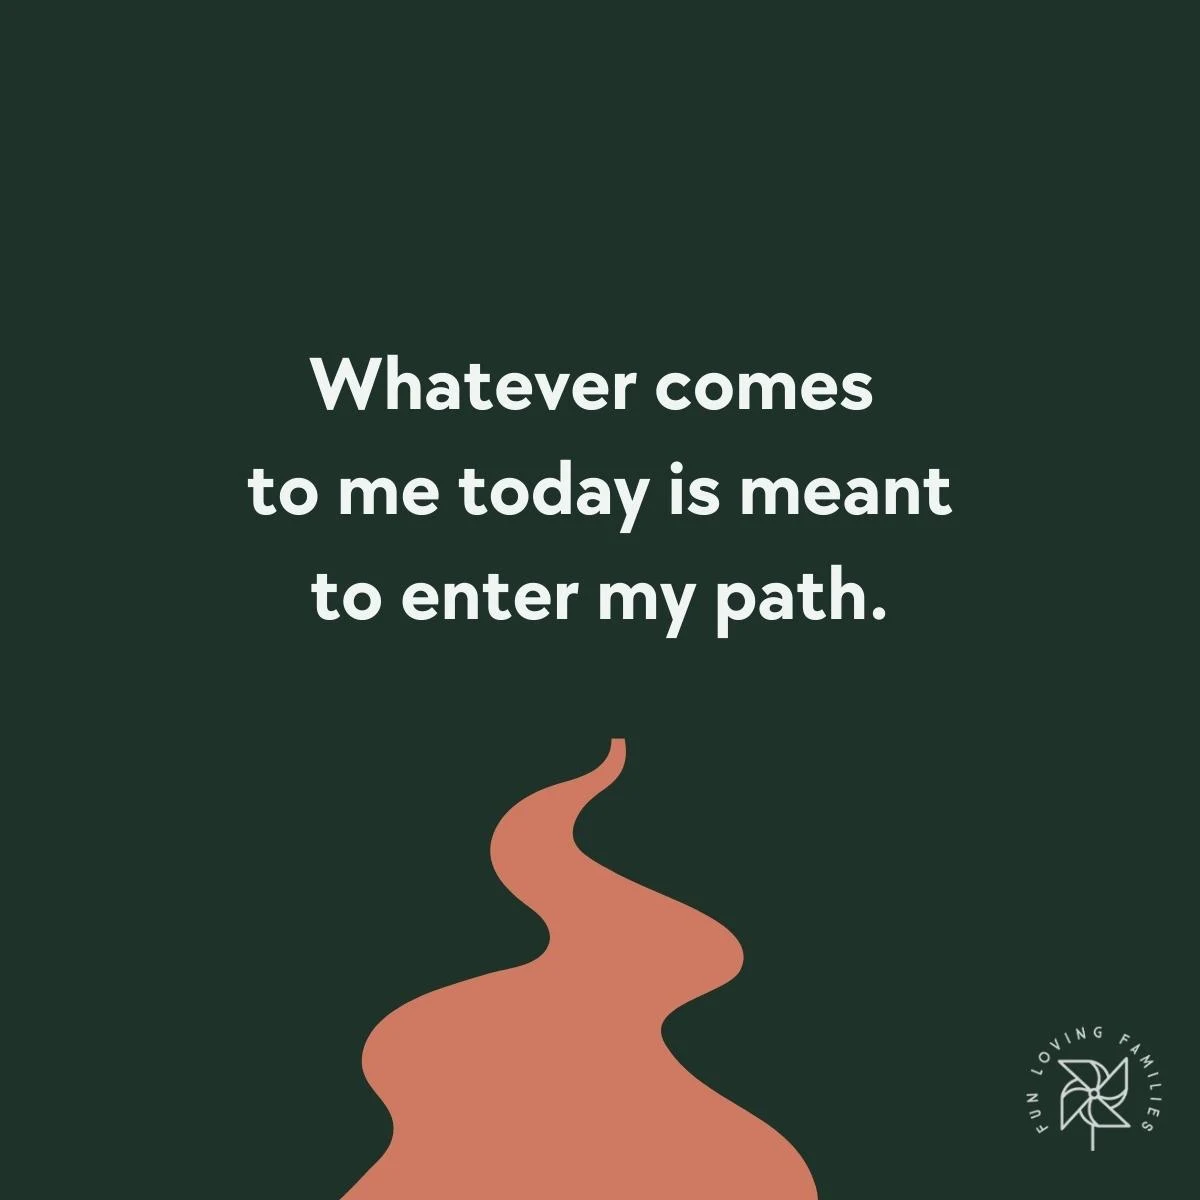 Whatever comes to me today is meant to enter my path affirmation